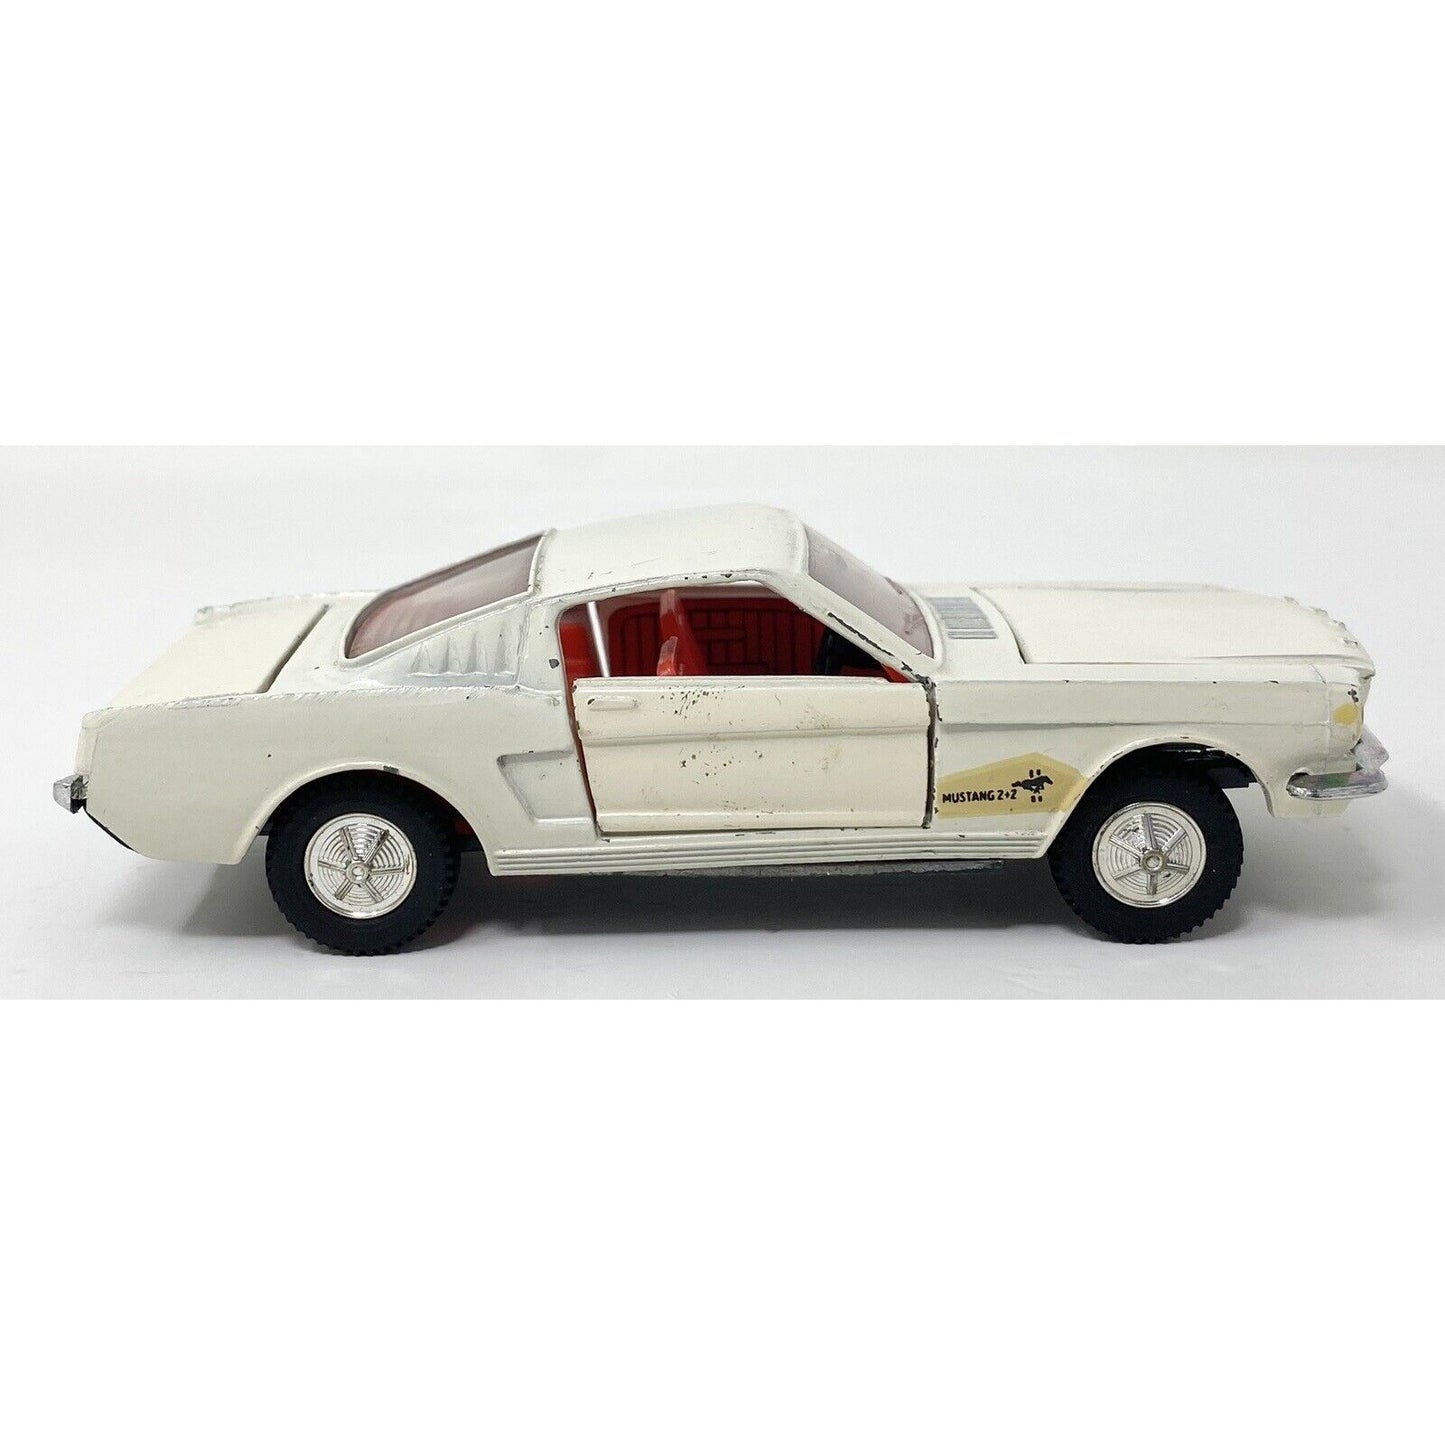 Vintage 1960's Meccano Dinky Ford Mustang 161 Fastback - England, White